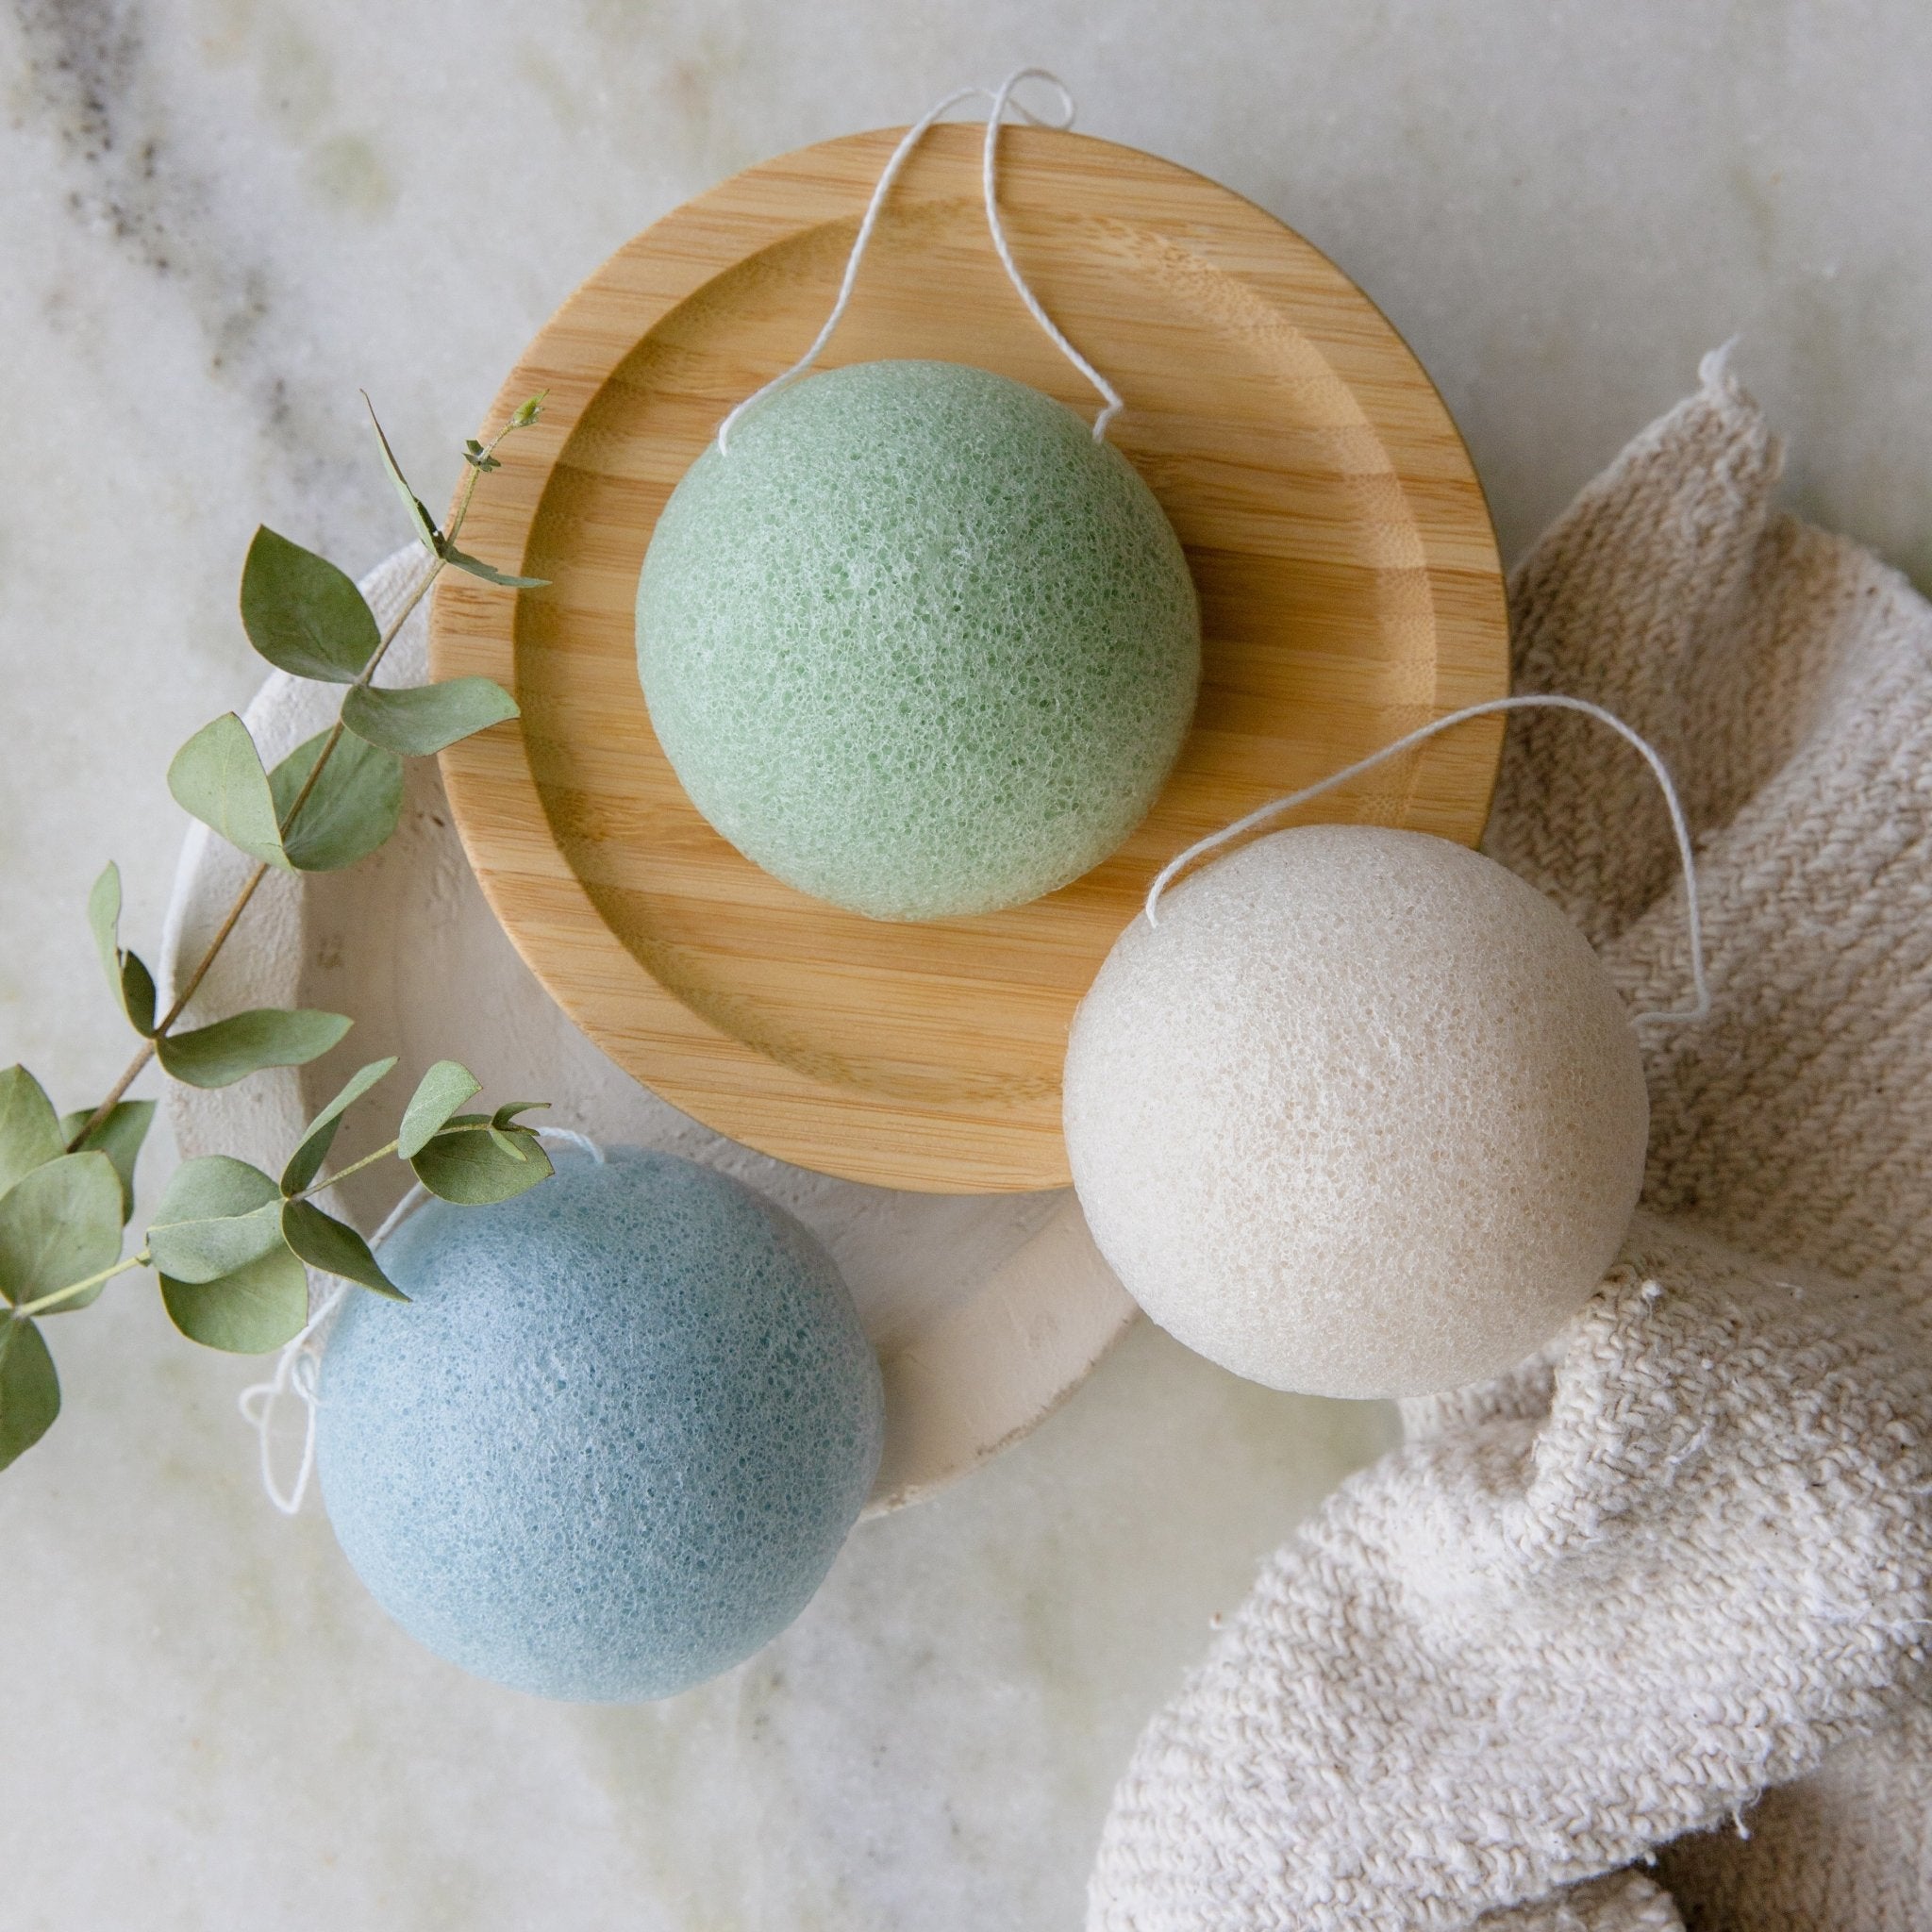 Gift Set: 3 Konjac Facial Cleansing Sponges In Cotton Pouch